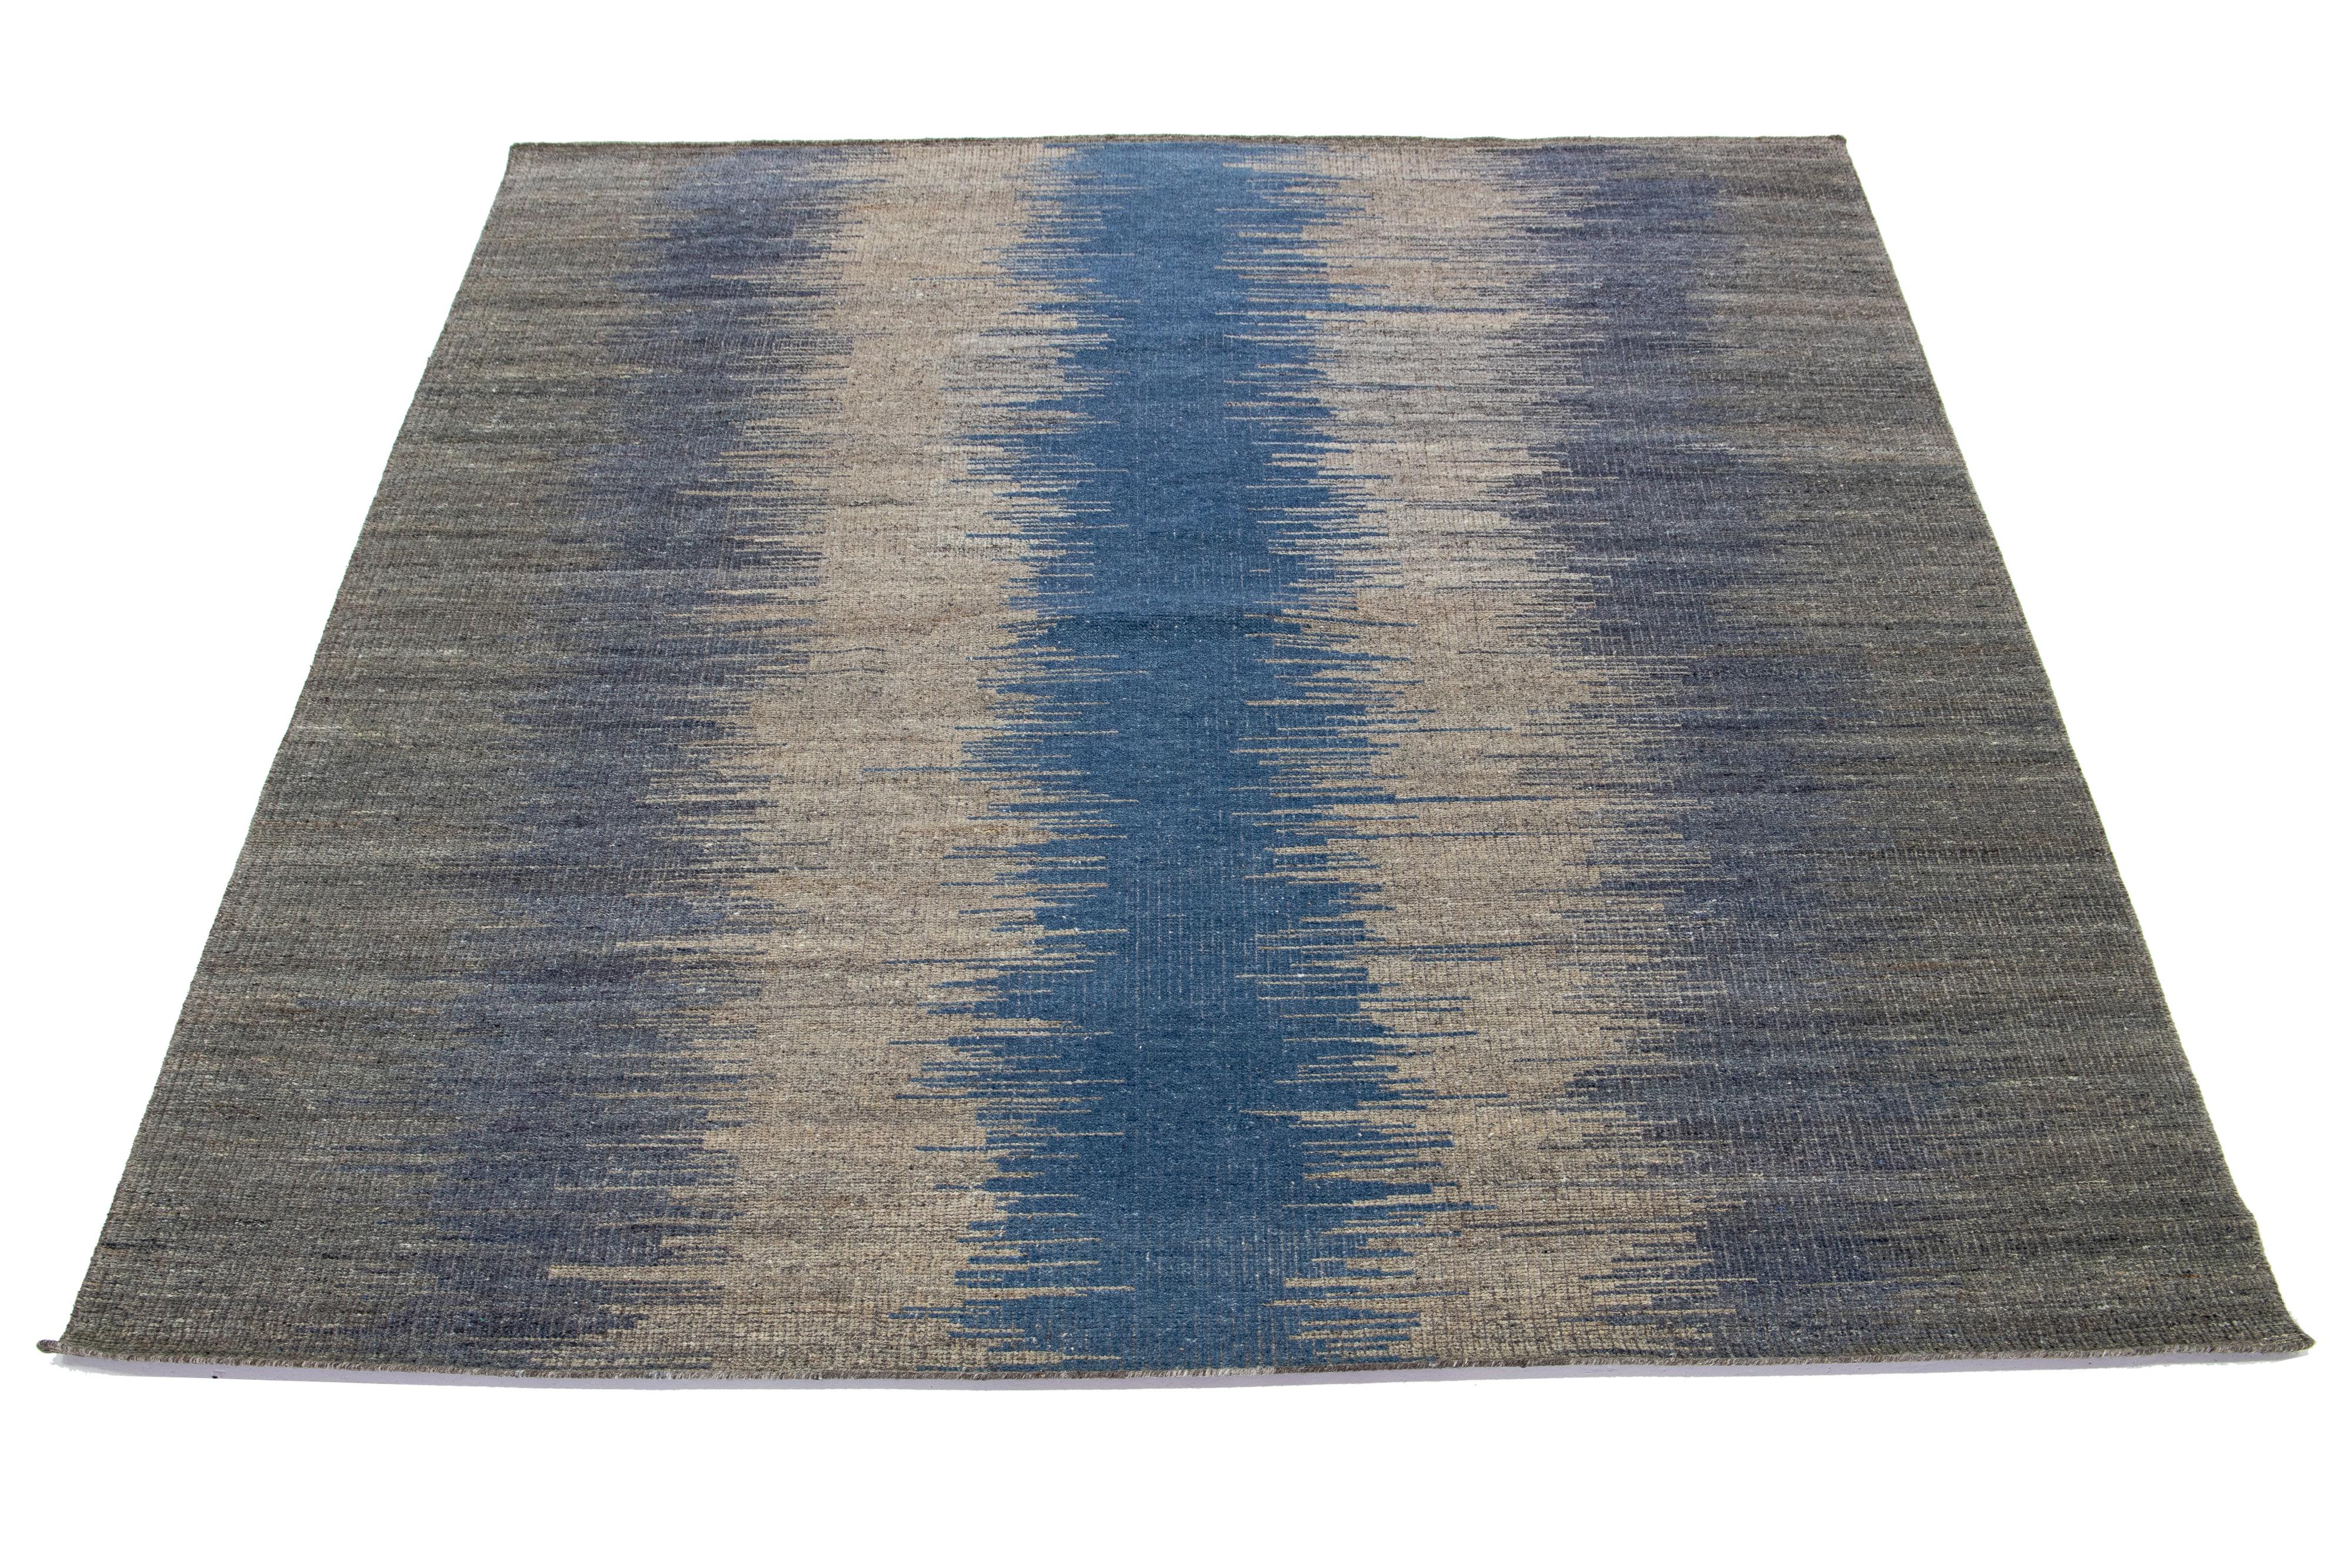 This Indian rug features a modern Kilim flatweave style made from wool. The rug boasts a gray and blue abstract design.

This rug measures 8'4